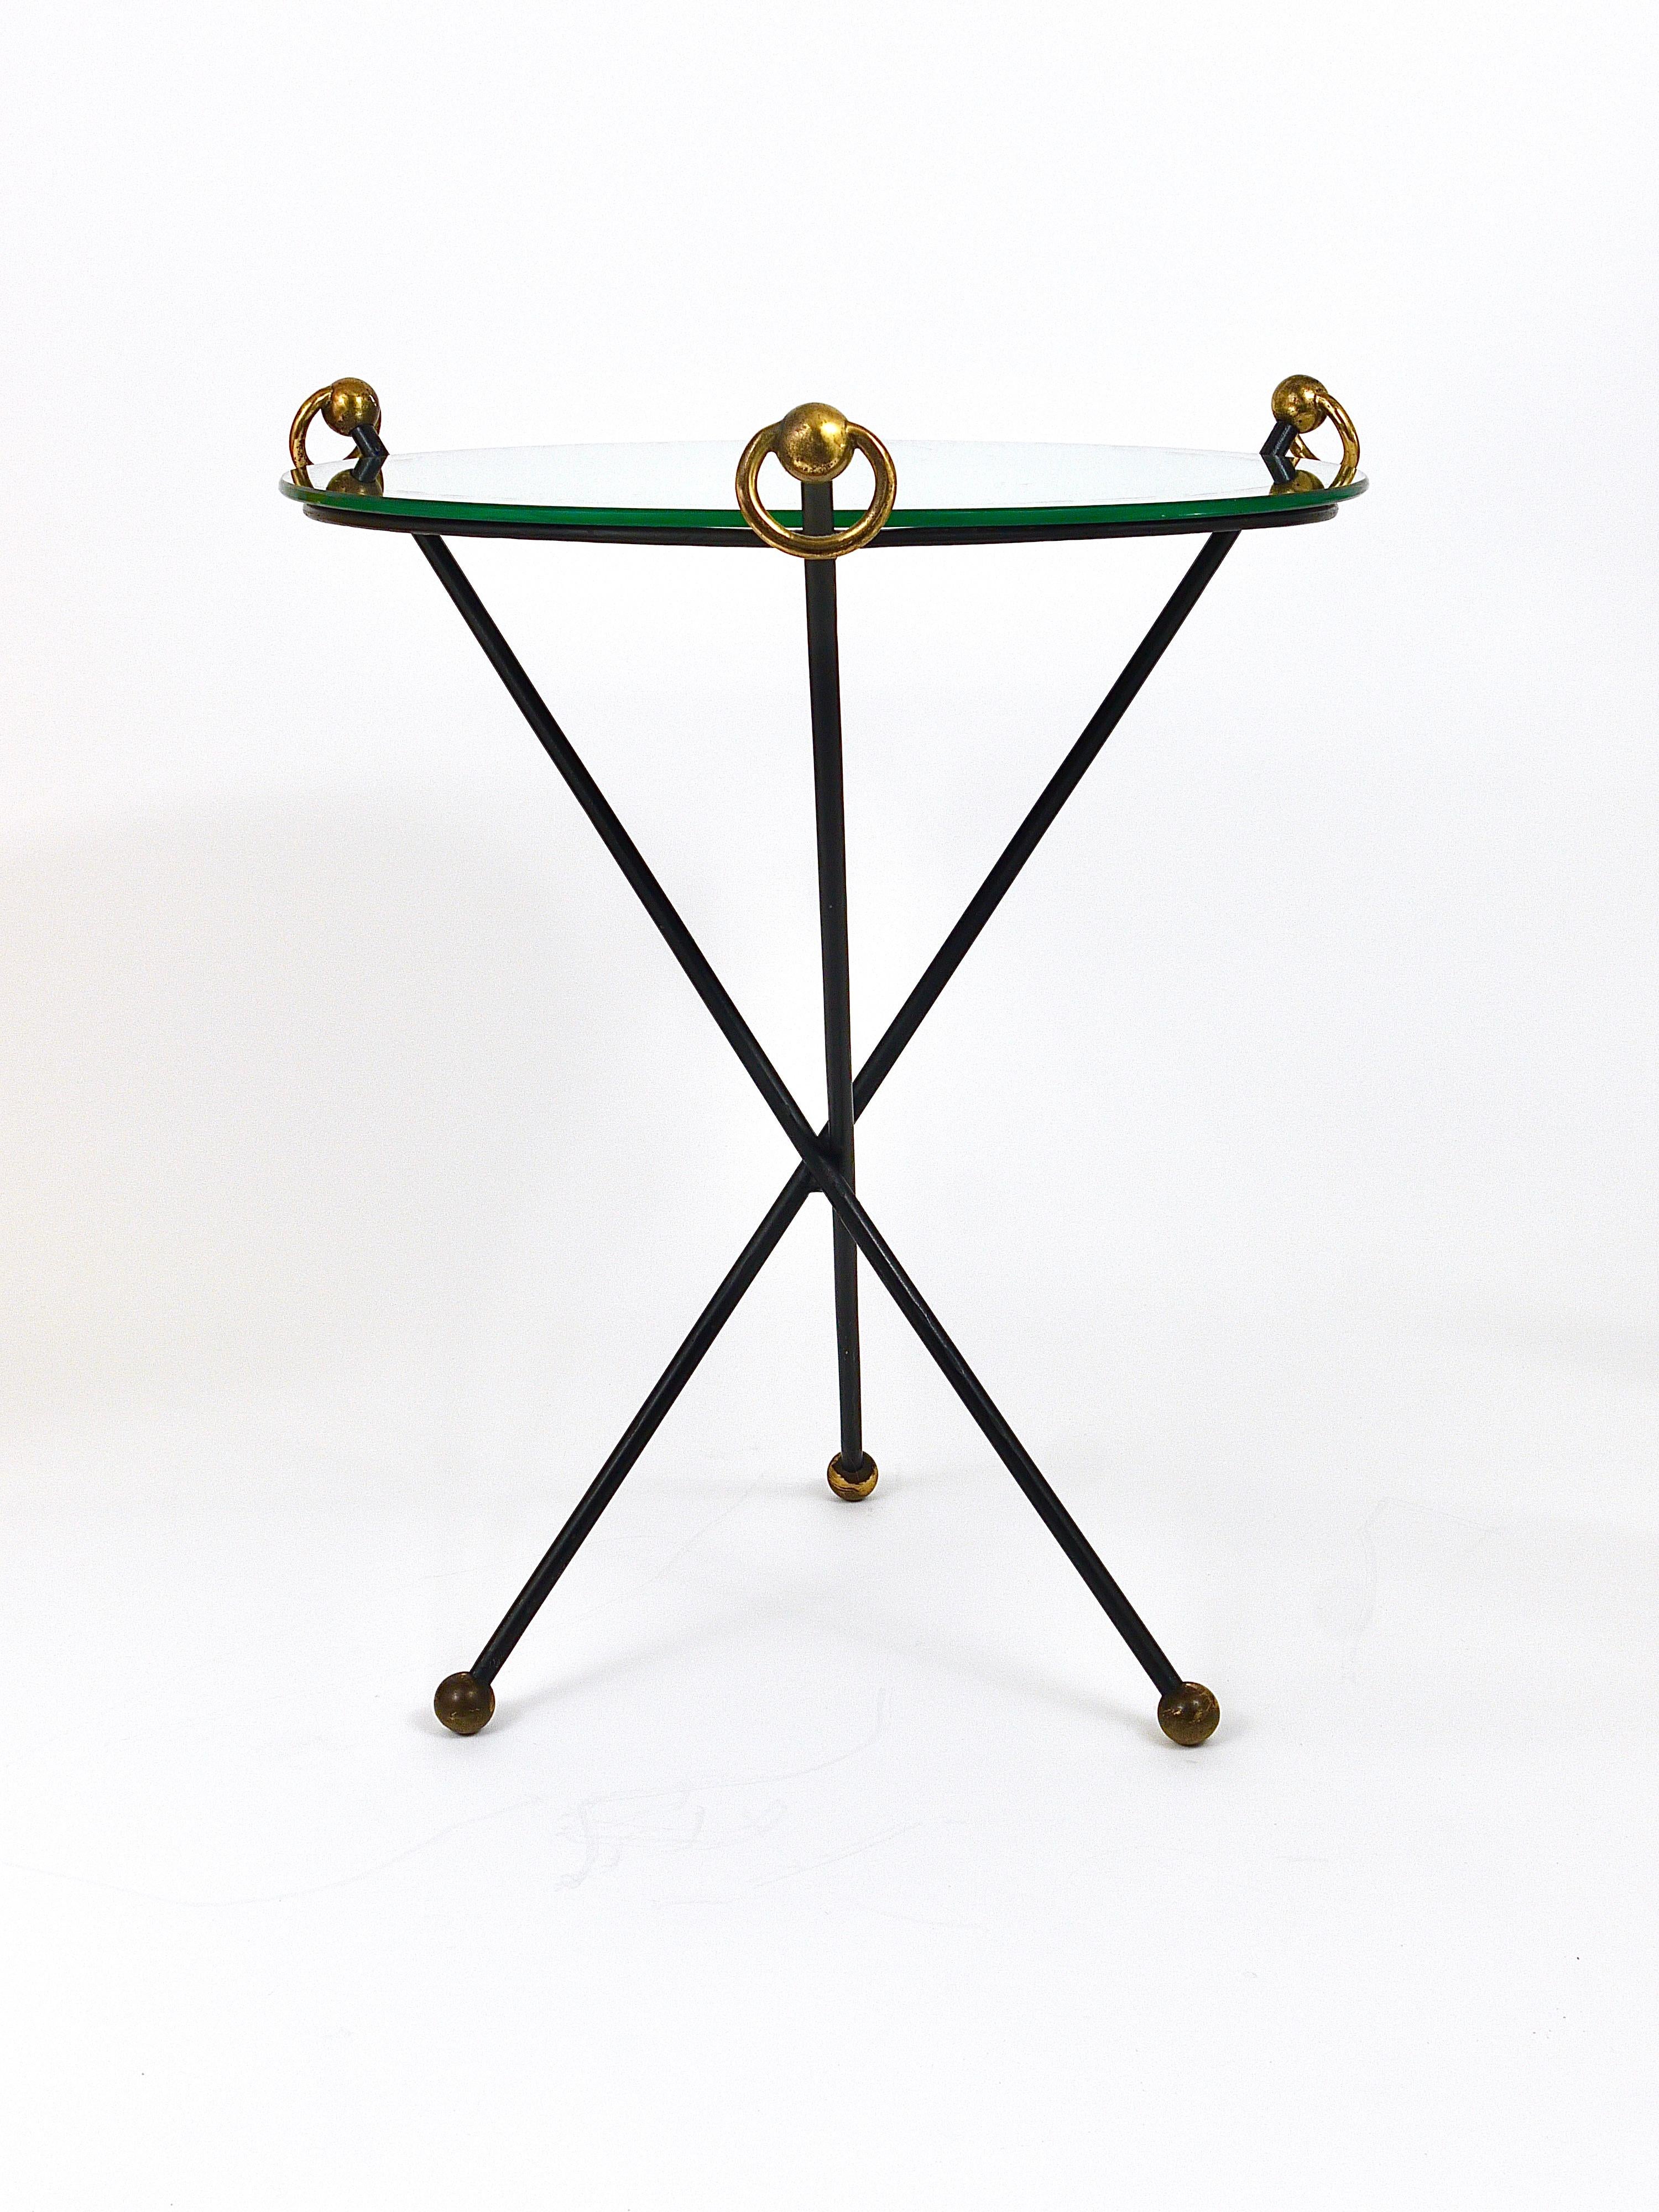 20th Century French Mid-Century Modern Mirror Side Table, Jacques Adnet Style, Brass, 1950s For Sale